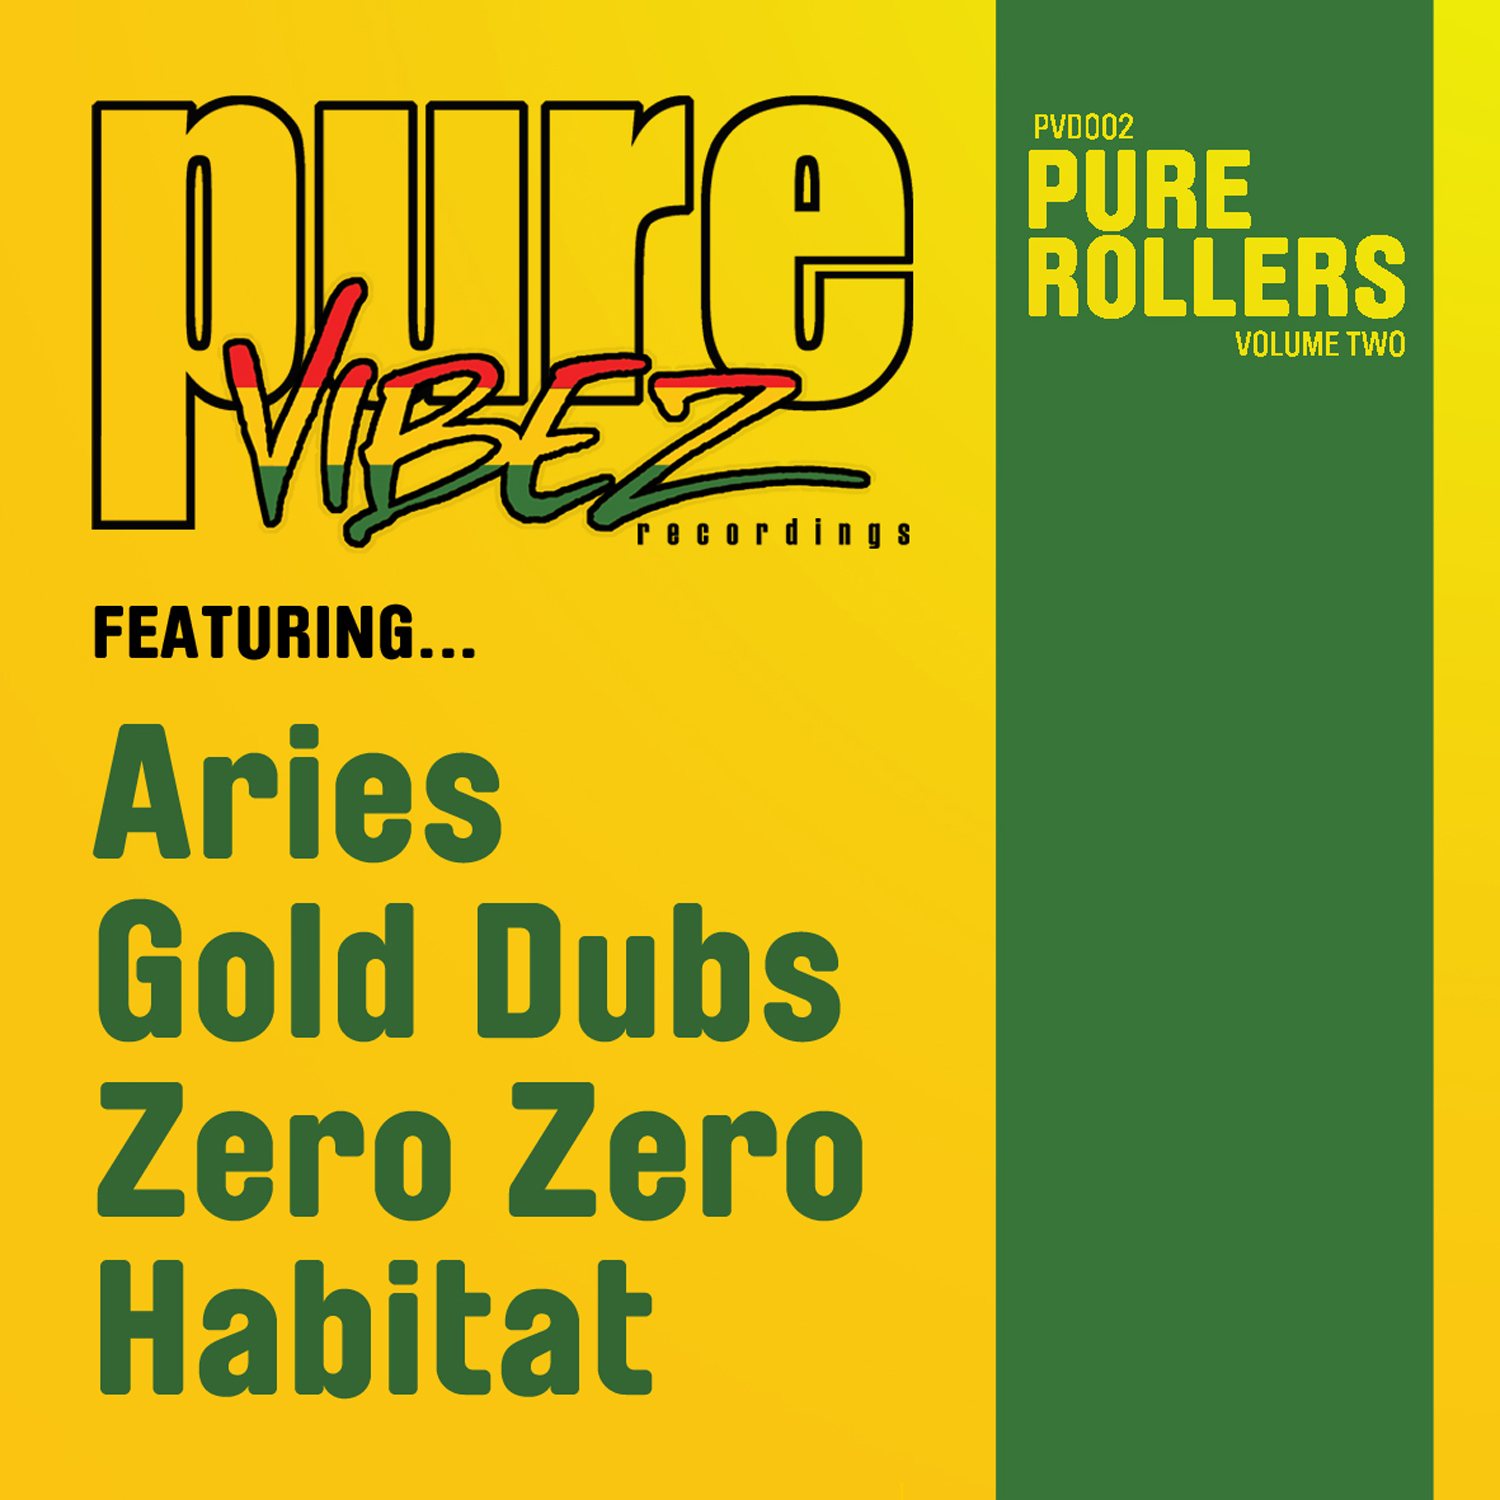 Pure Rollers Volume 2